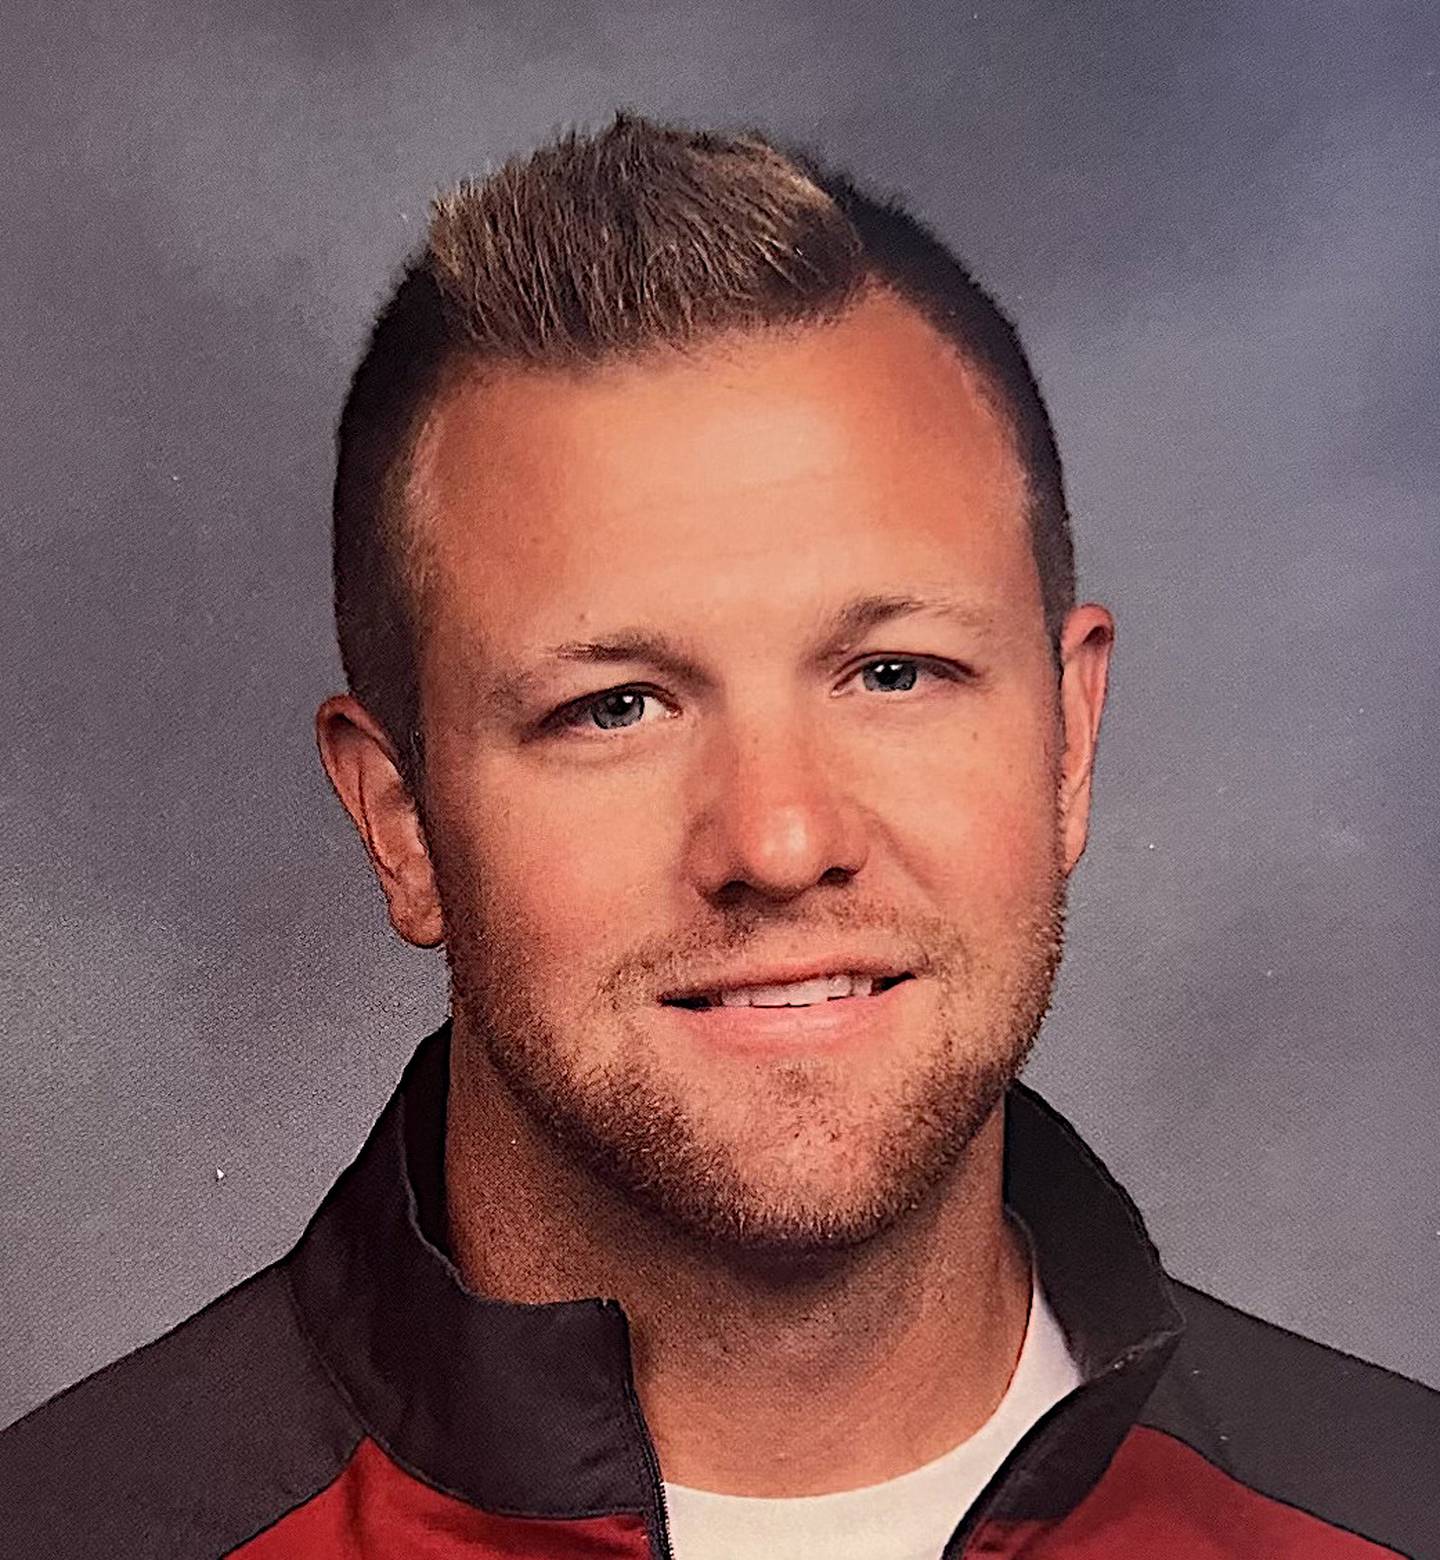 Justin Zink will be the offensive coordinator for the Morris football team this season.